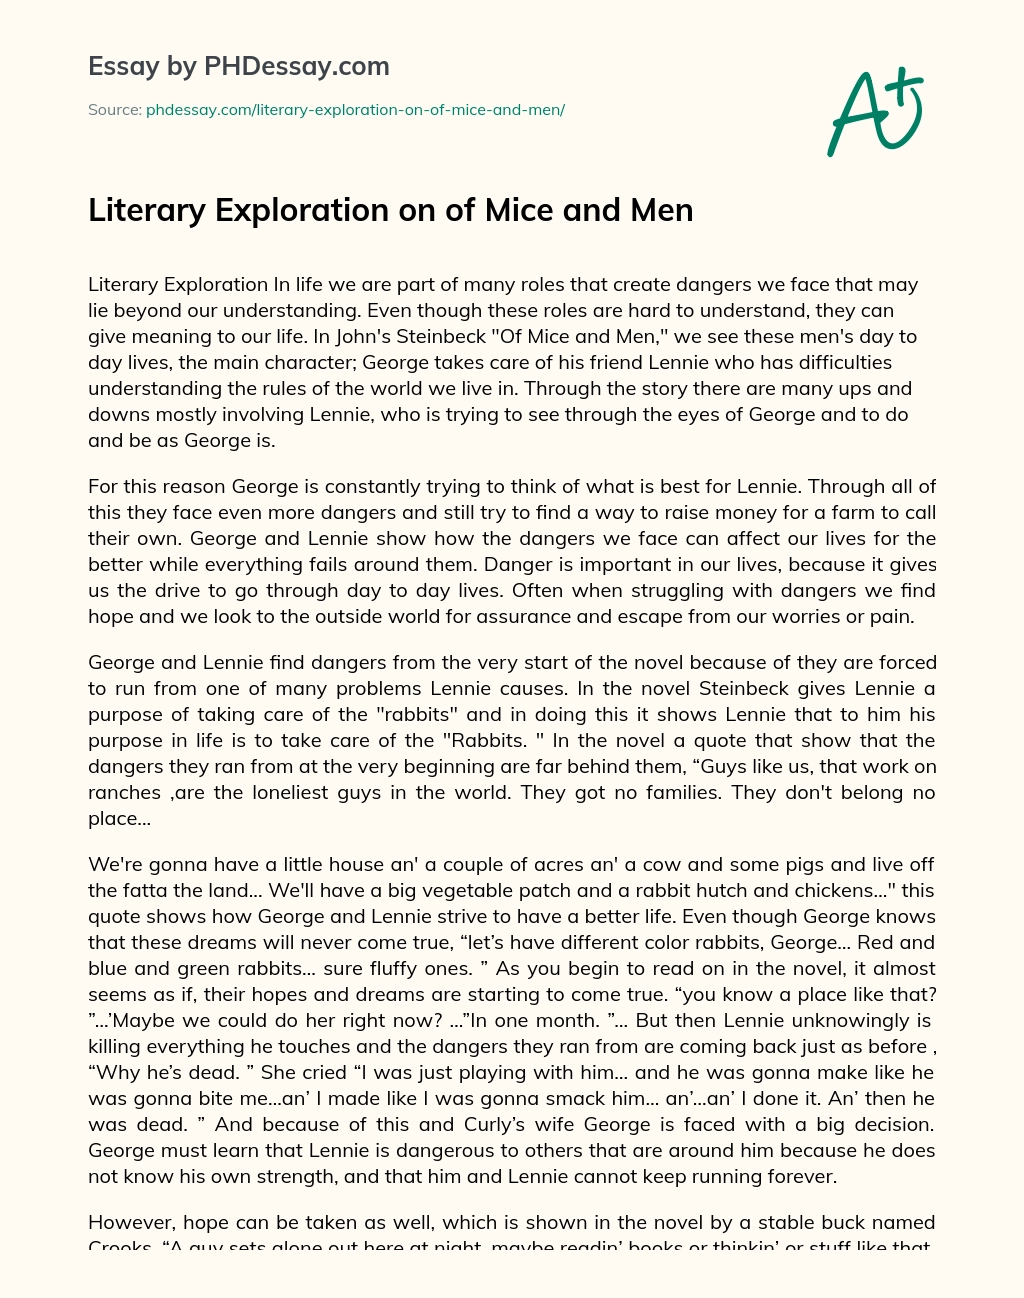 Literary Exploration on of Mice and Men essay